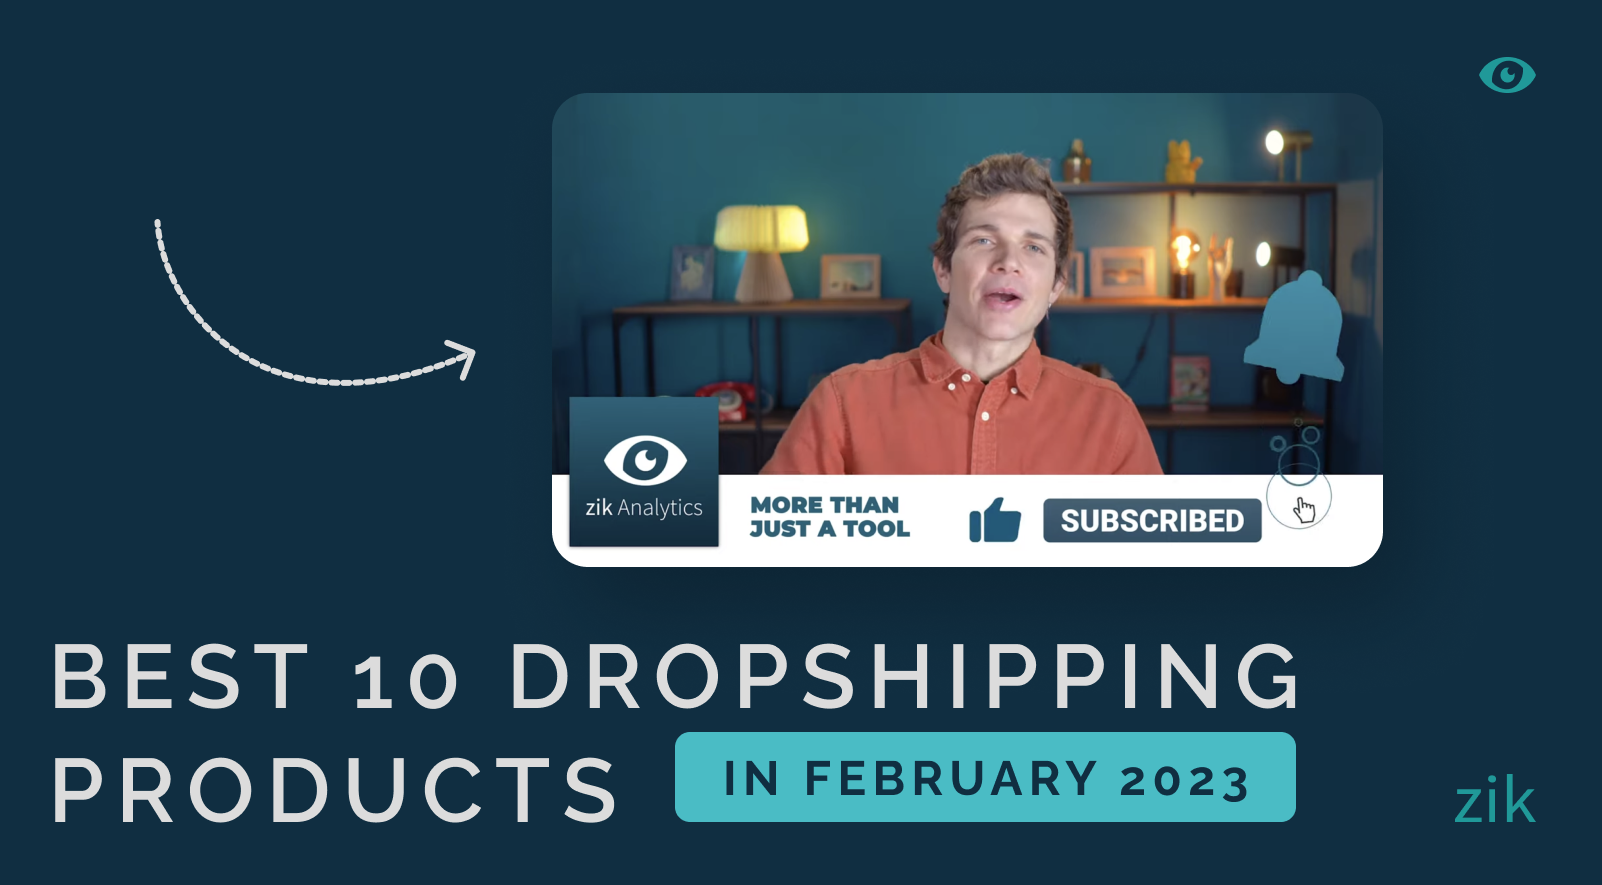 https://www.zikanalytics.com/blog/wp-content/uploads/2023/01/best-10-dropshipping-products-in-february-2023-_-aliexpress-best-sellers.png